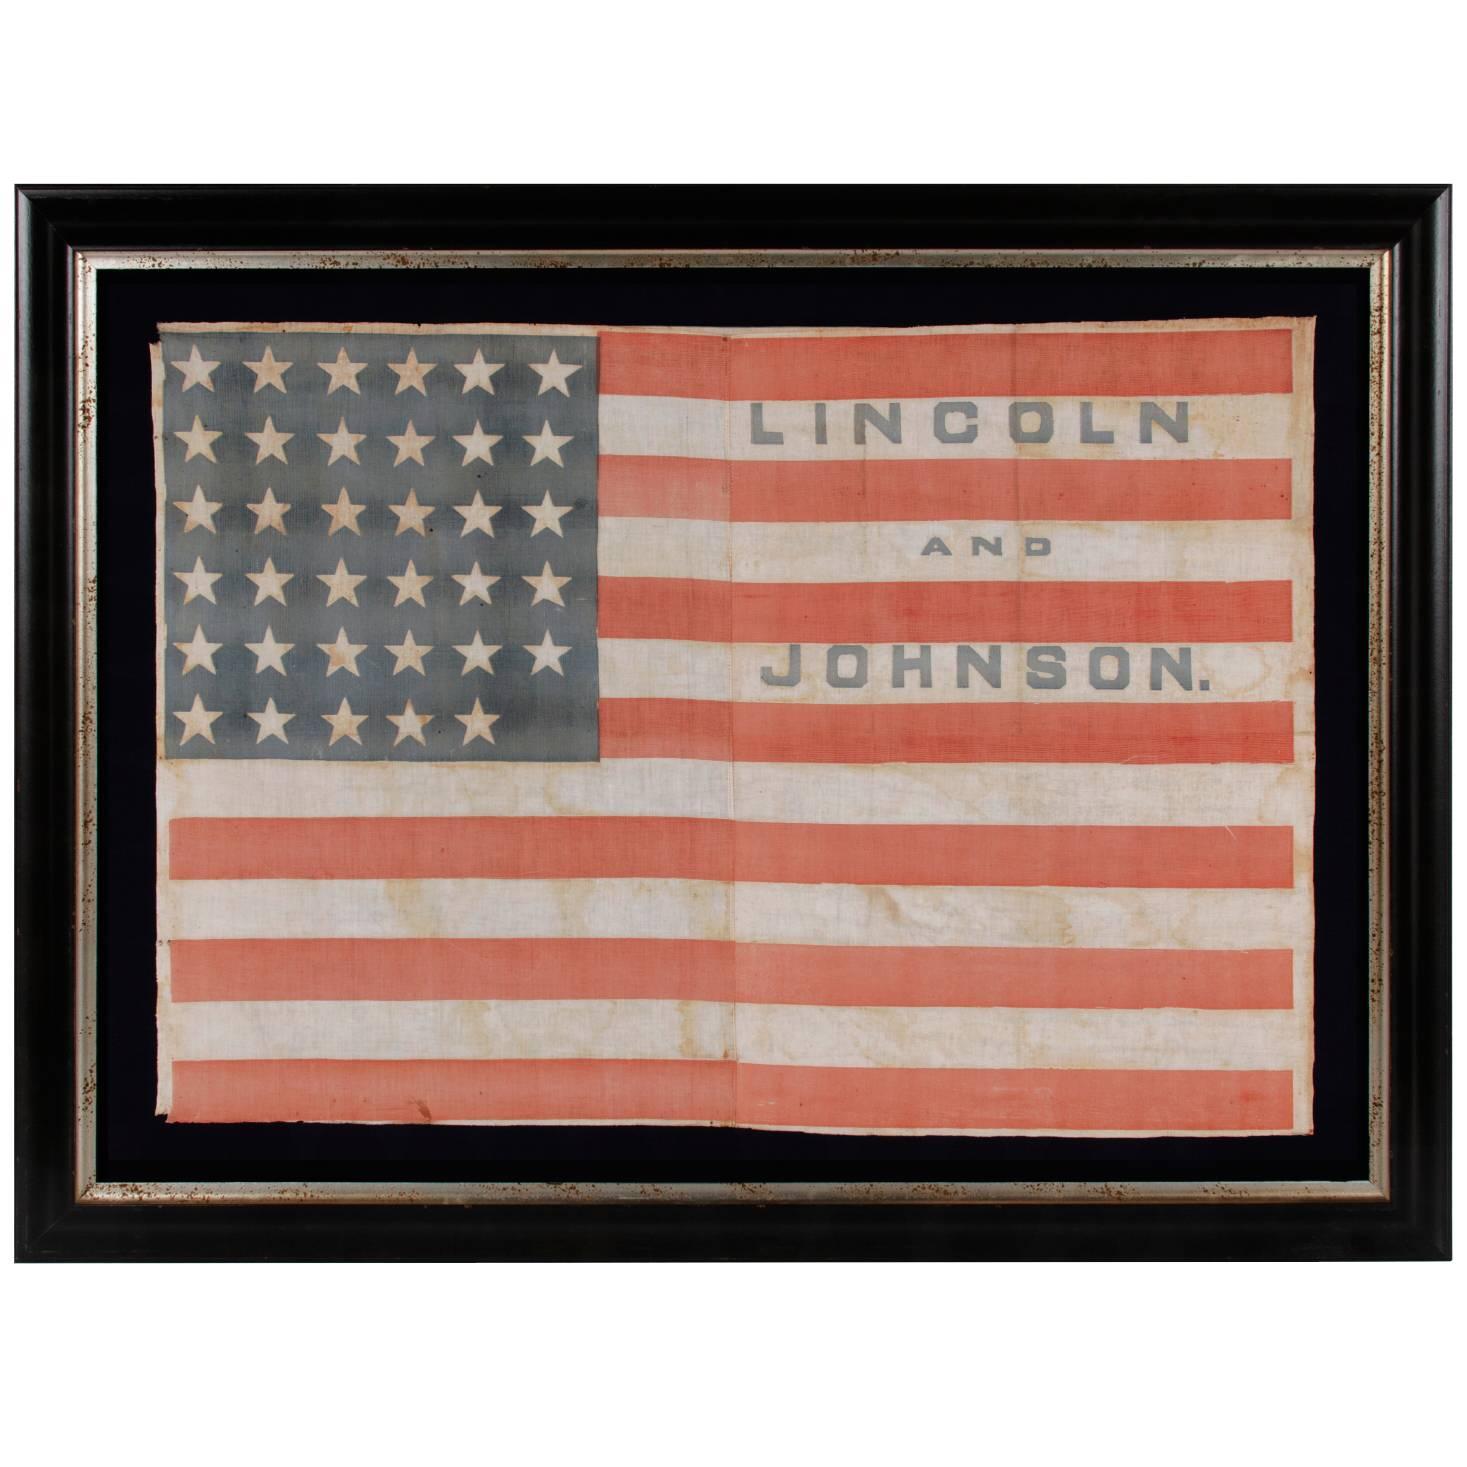 35 Stars in a Notched Pattern on a Flag Made for the Lincoln & Johnson Campaign